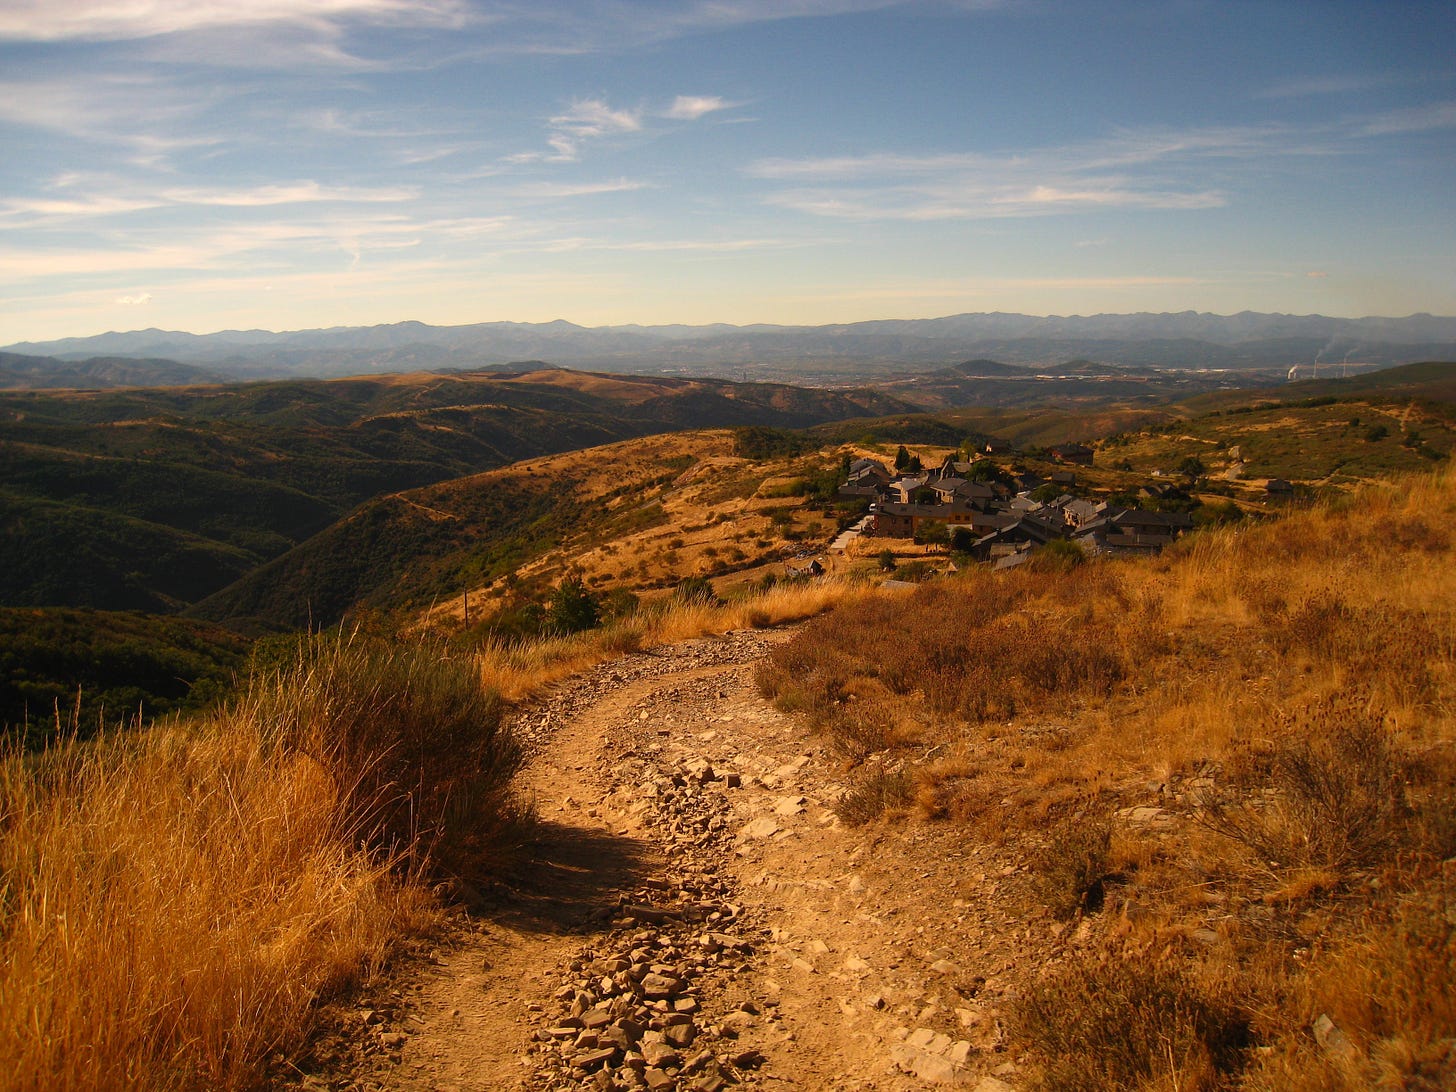 A stone hiking path stretches out into the distance over rolling, grassy hills in the golden glow of sunset.